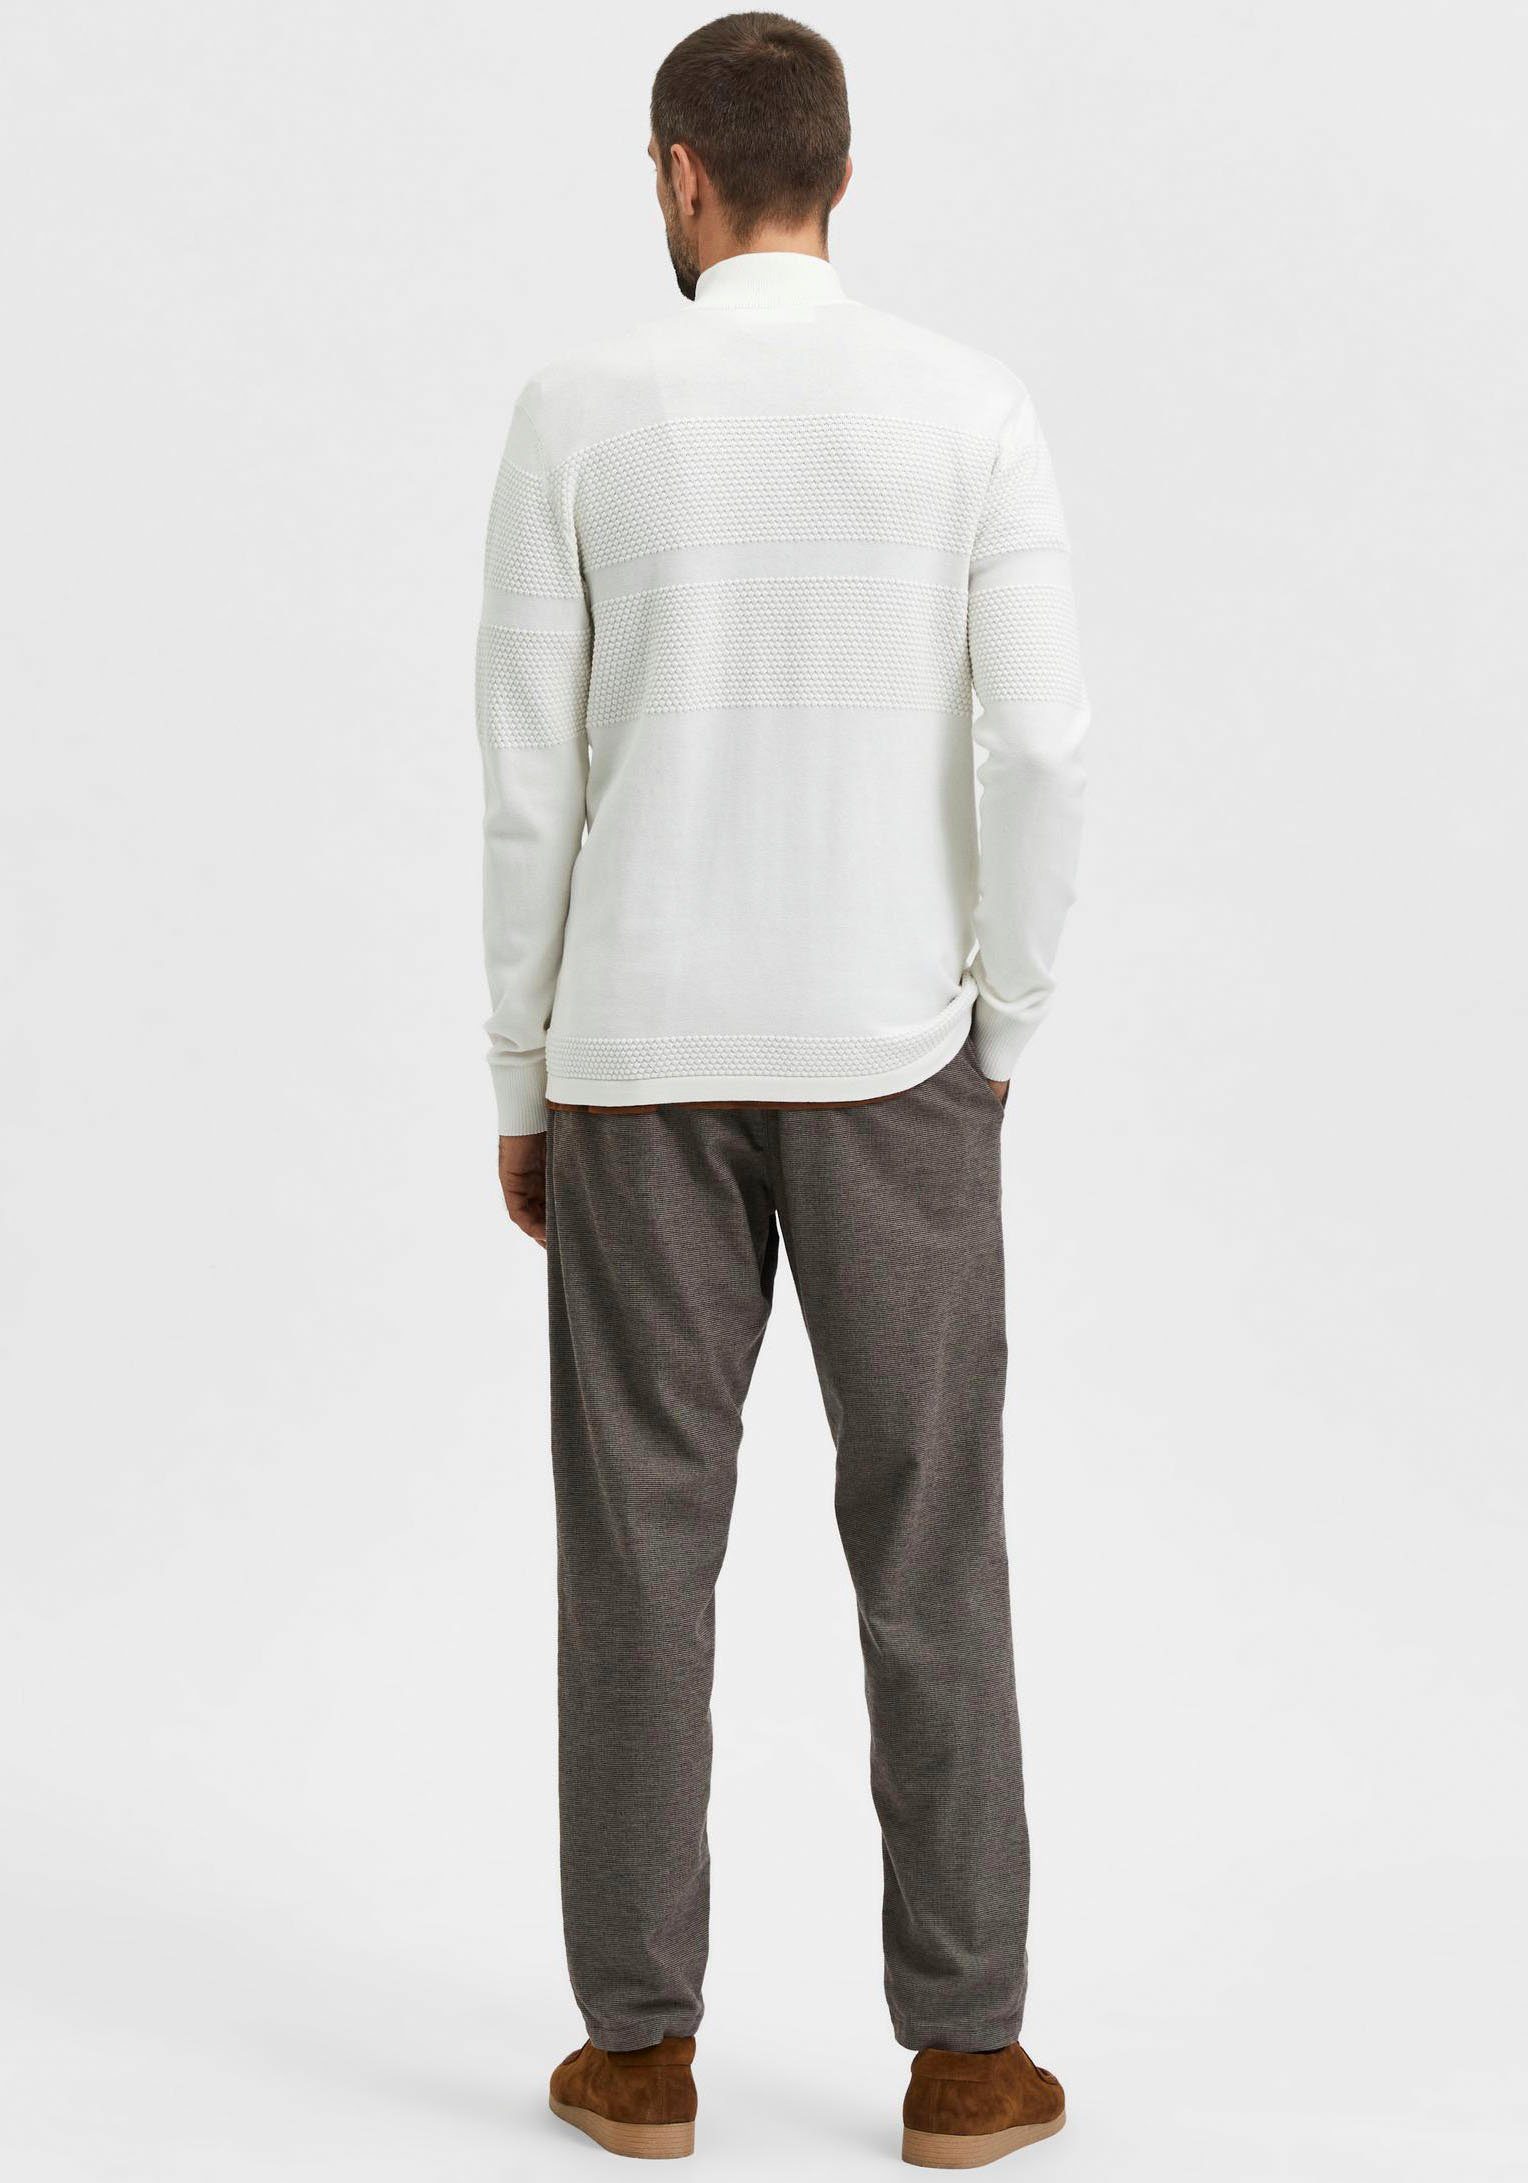 KNIT Trageangenehmes Material ZIP, HALF SELECTED MAINE HOMME Troyer